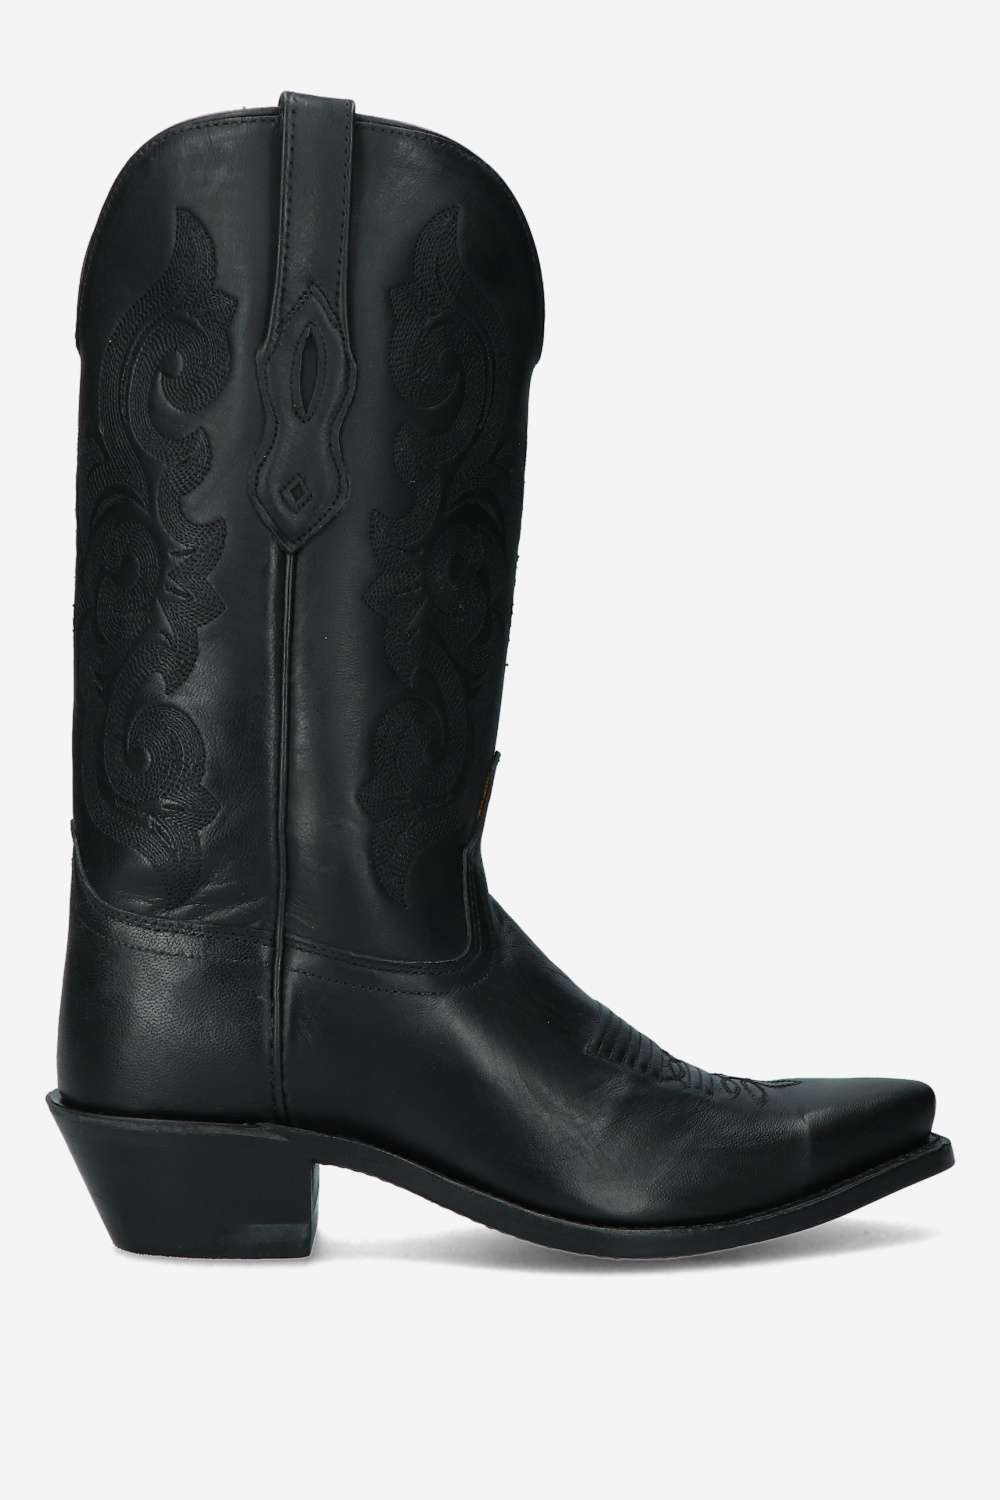 Bootstock Boots Black